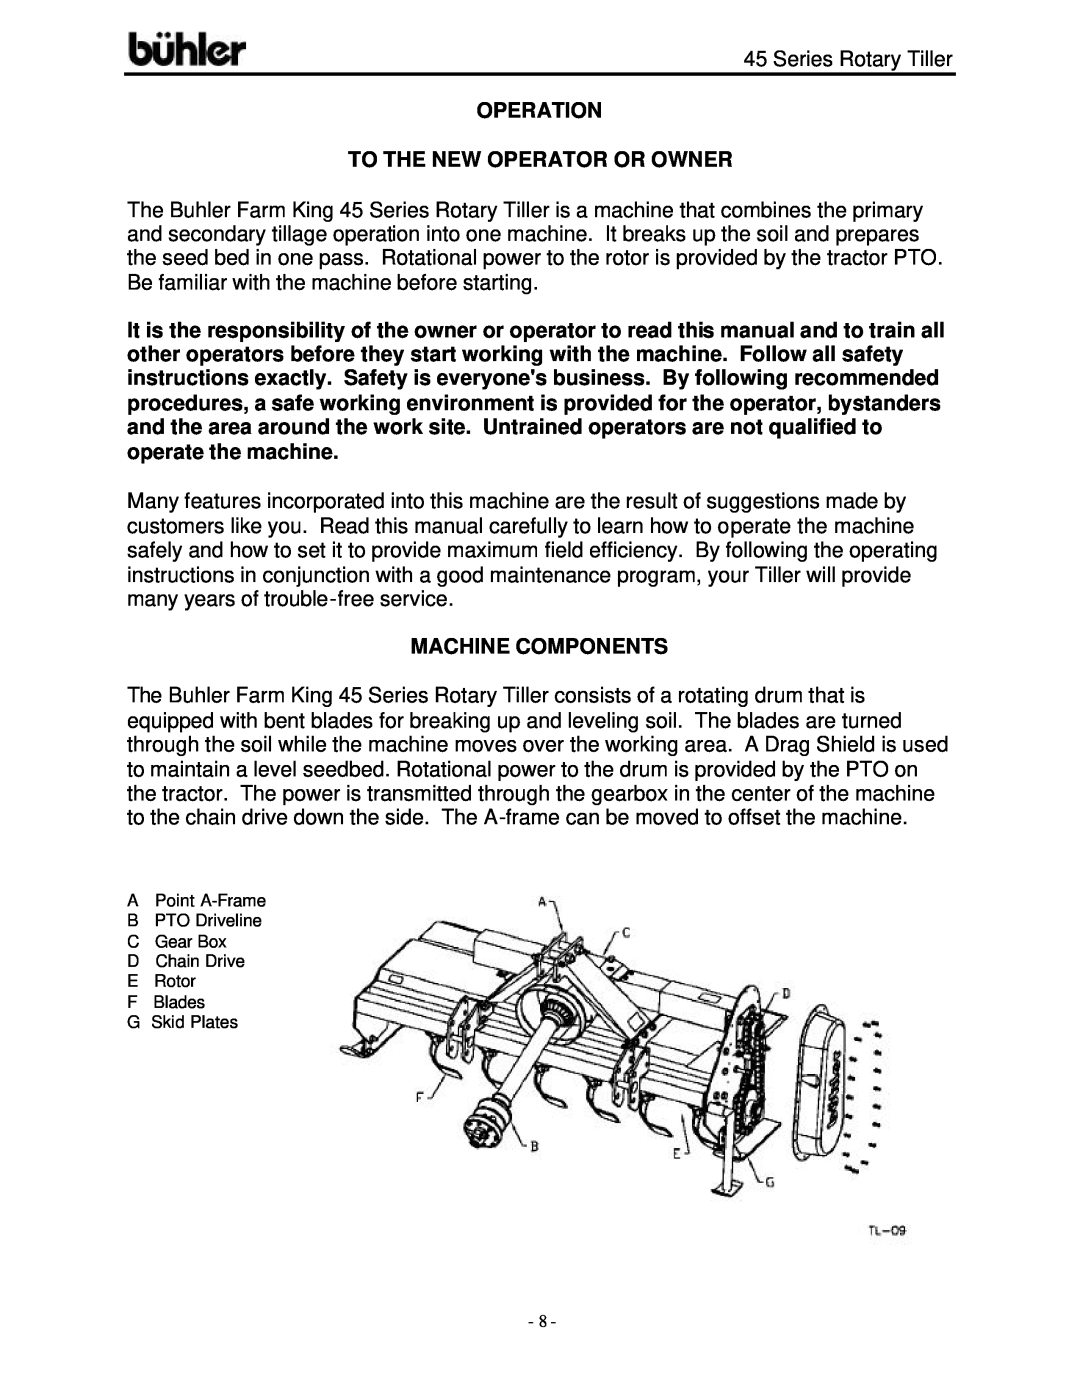 Buhler 45 Series warranty Operation To The New Operator Or Owner, Machine Components 